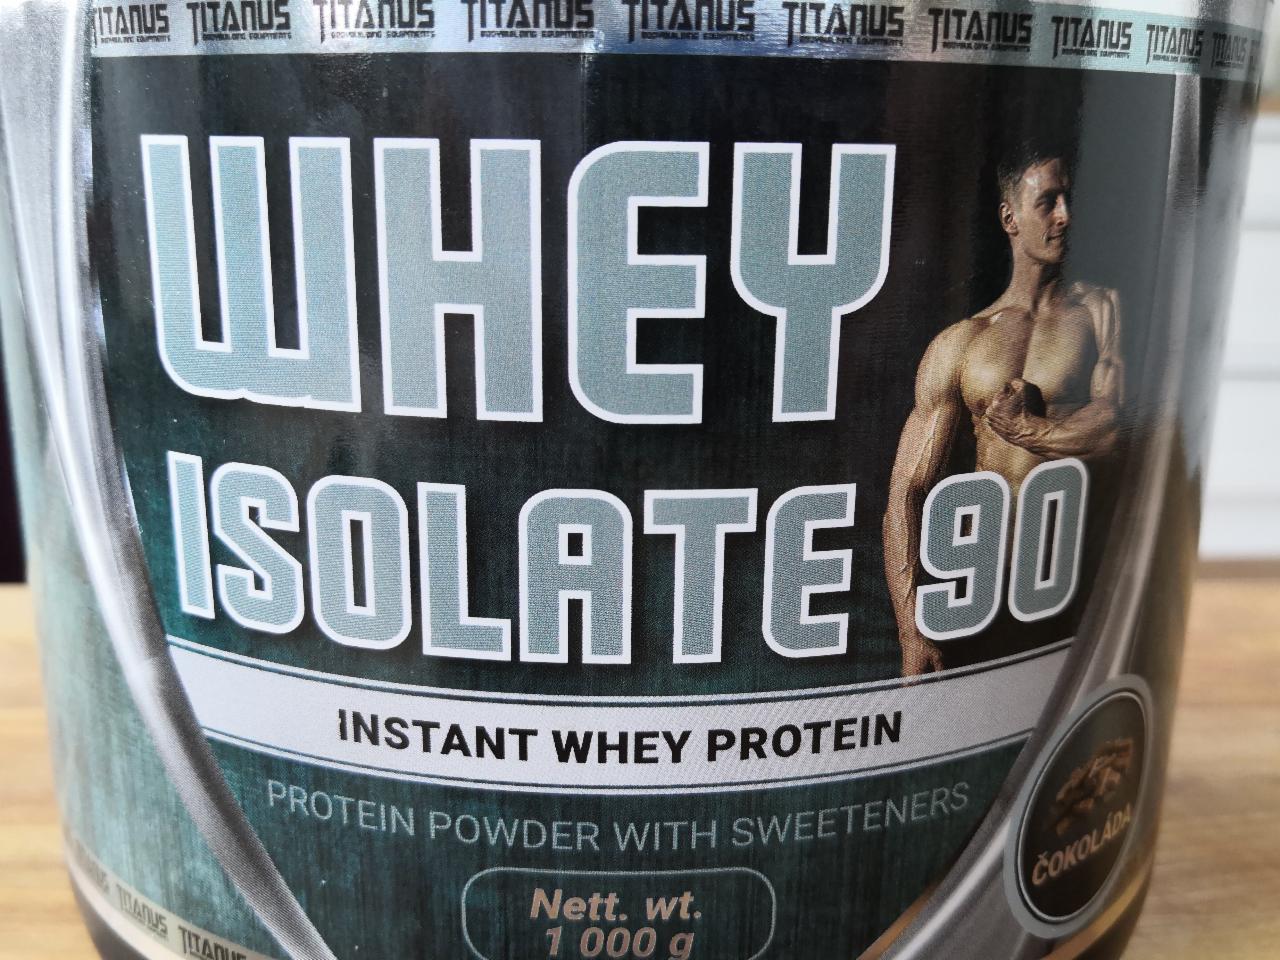 Fotografie - WHEY ISOLATE 90 Instant whey protein